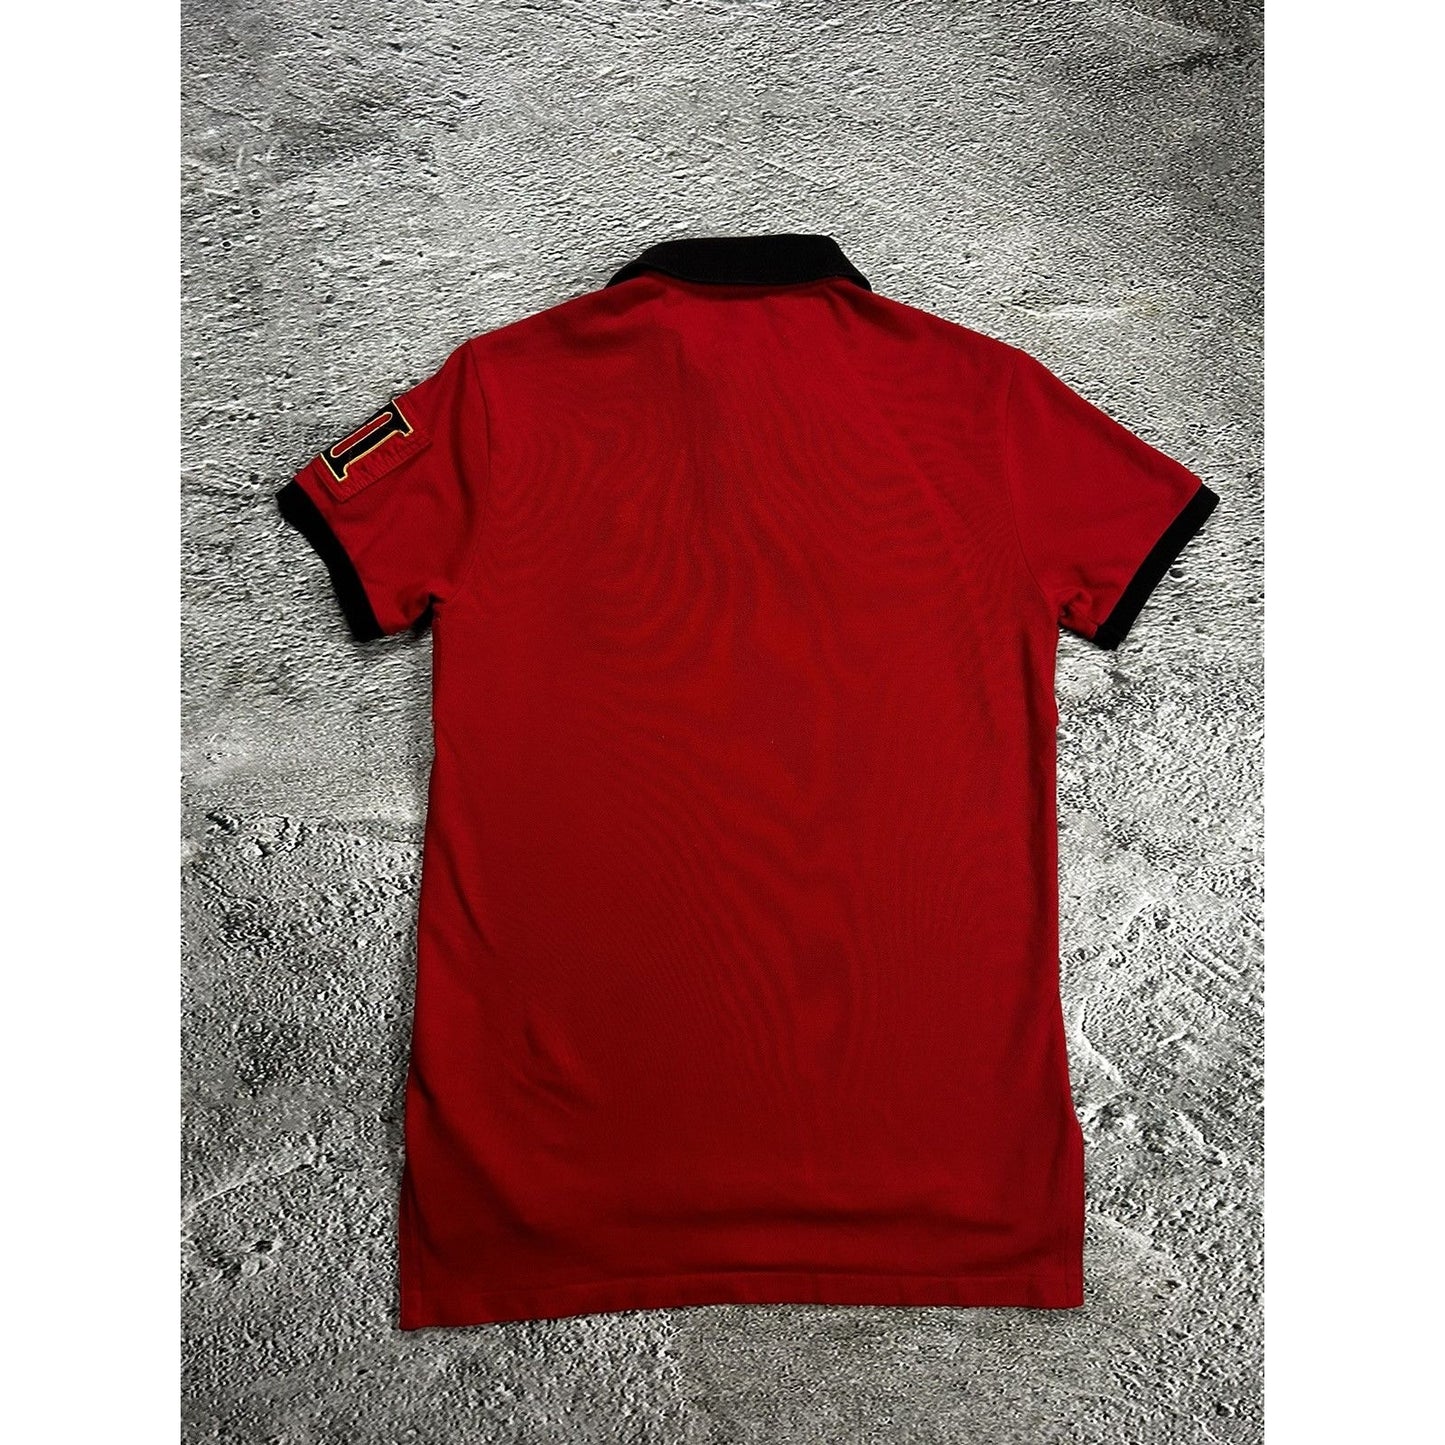 Chief Keef Polo Ralph Lauren red big pony polo T-shirt